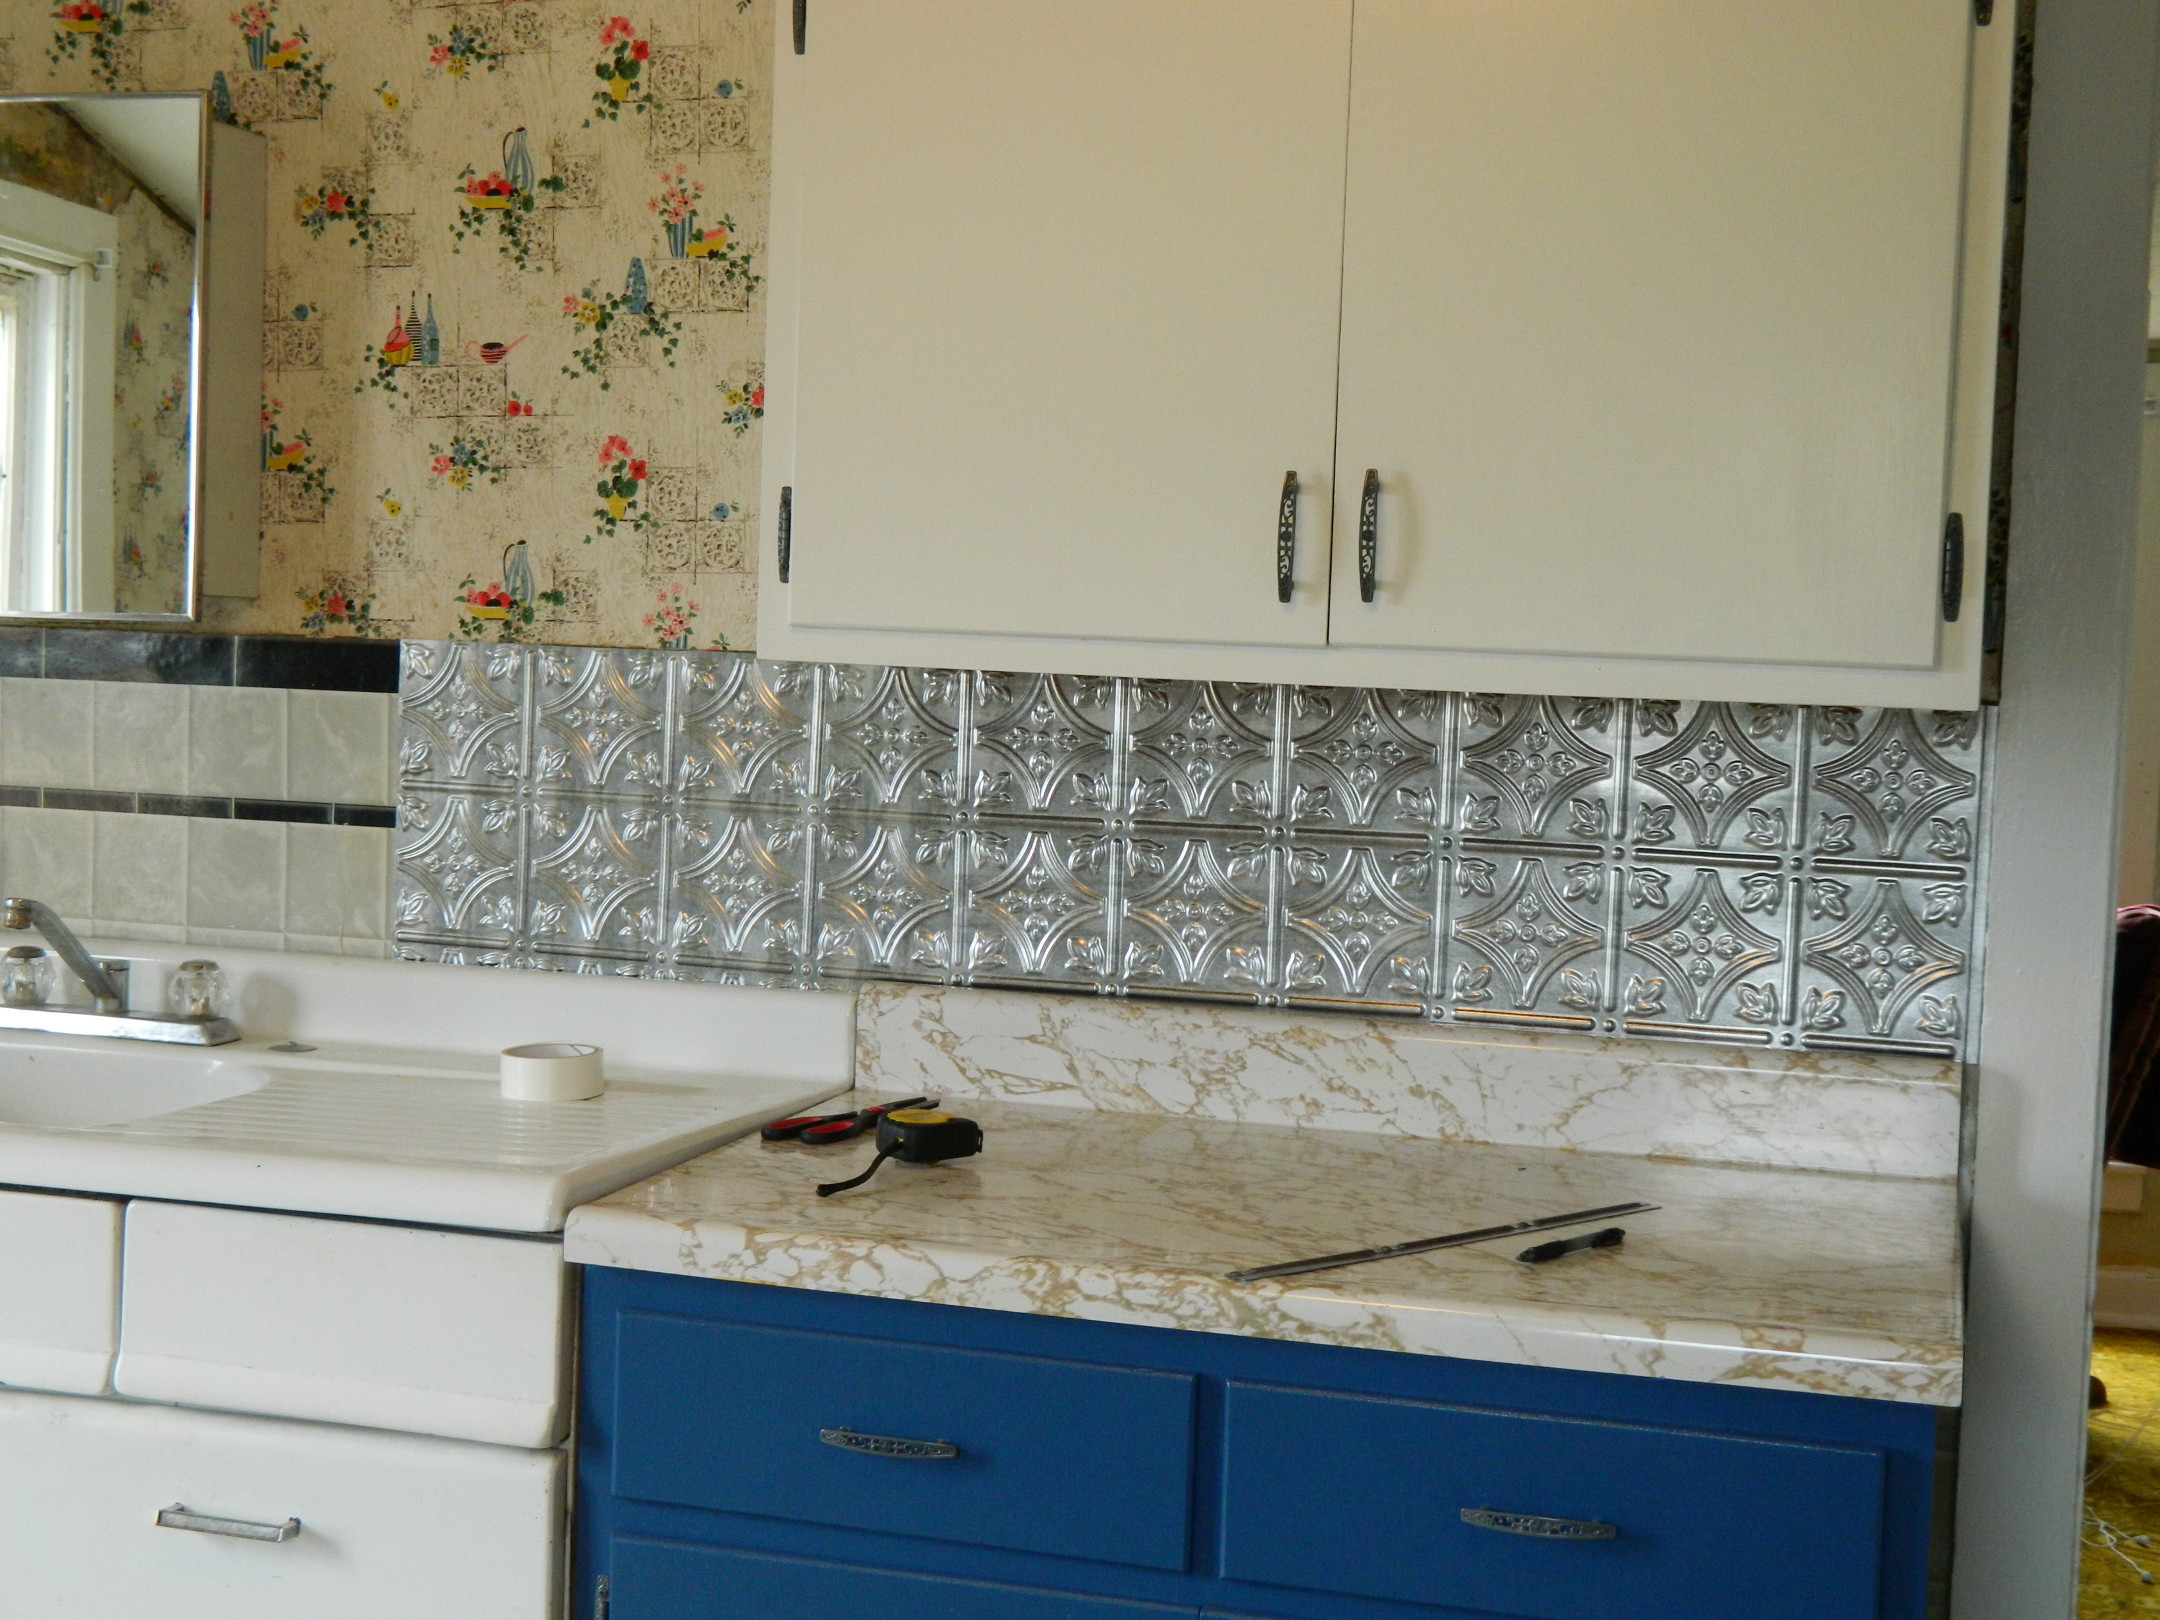 Peel And Stick Kitchen Backsplash Luxury Kitchen Your Kitchen Look Awesome By Using Peel And Stick Of Peel And Stick Kitchen Backsplash 